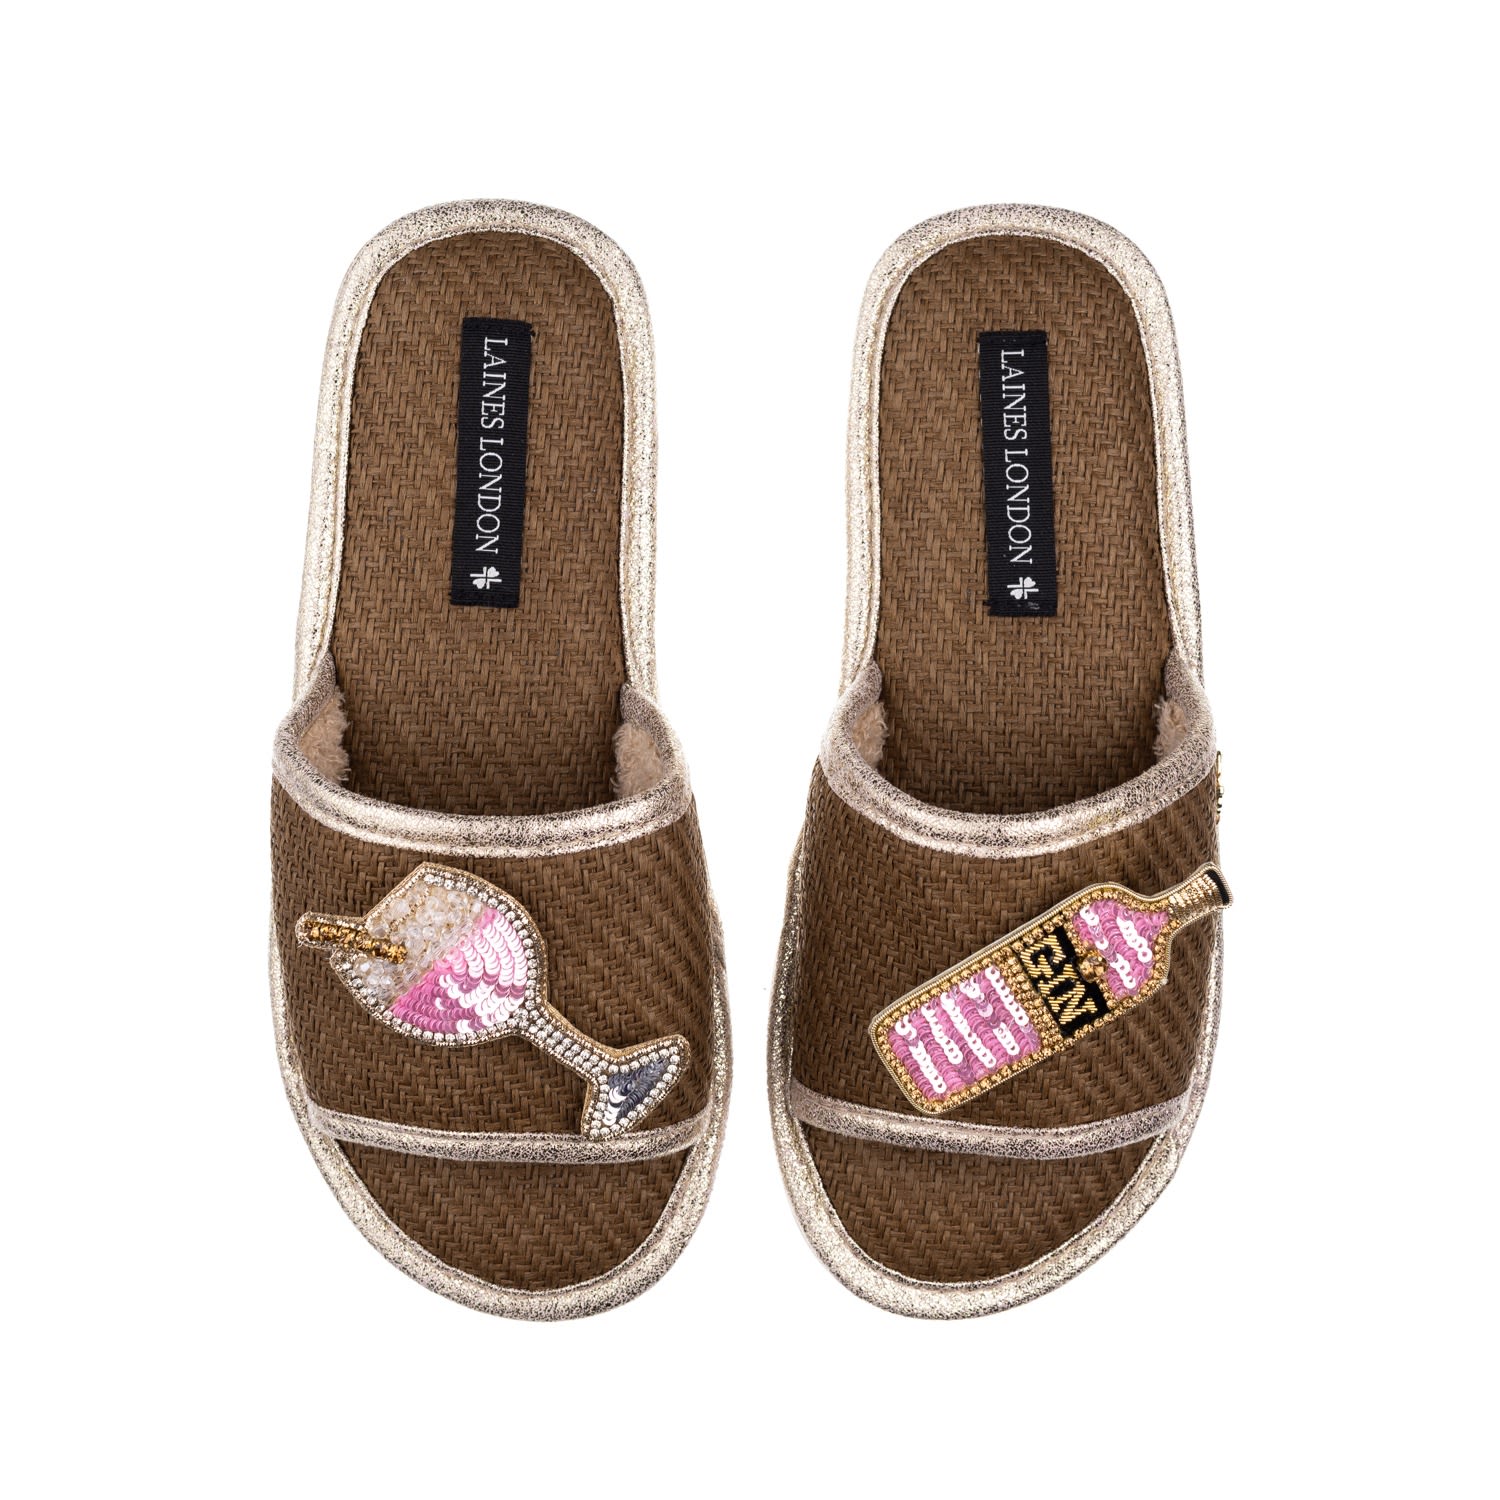 Laines London Women's Brown Straw Braided Sandals With Handmade Pink Gin Brooches - Caramel